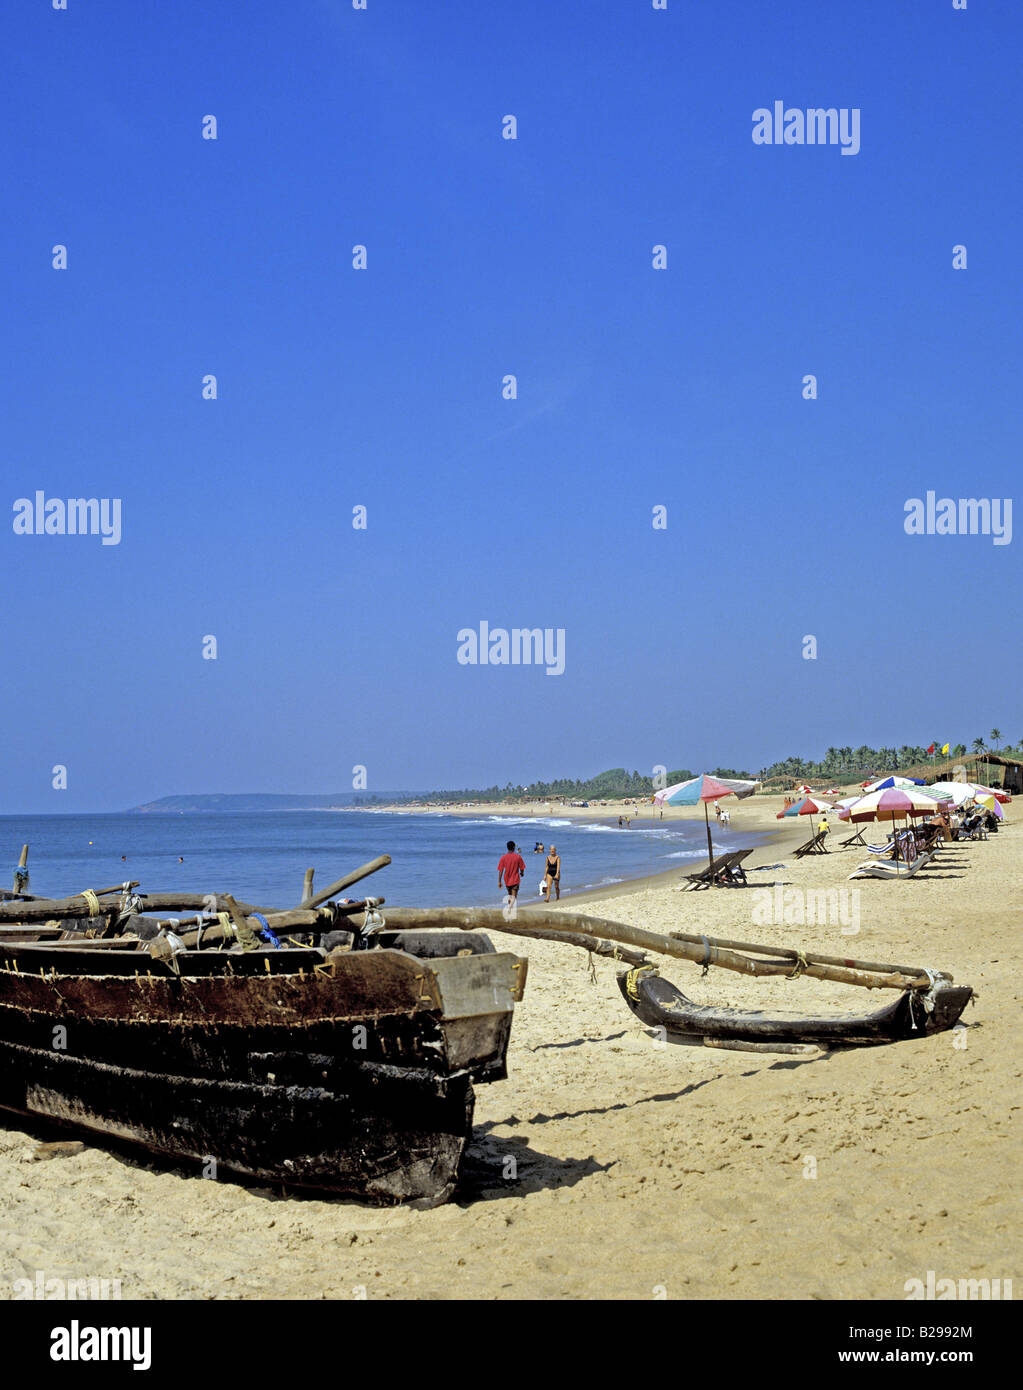 Fort Aguada Beach Goa State India Date 15 06 2008 Ref ZB548 115573 0089 COMPULSORY CREDIT World Pictures Photoshot Stock Photo